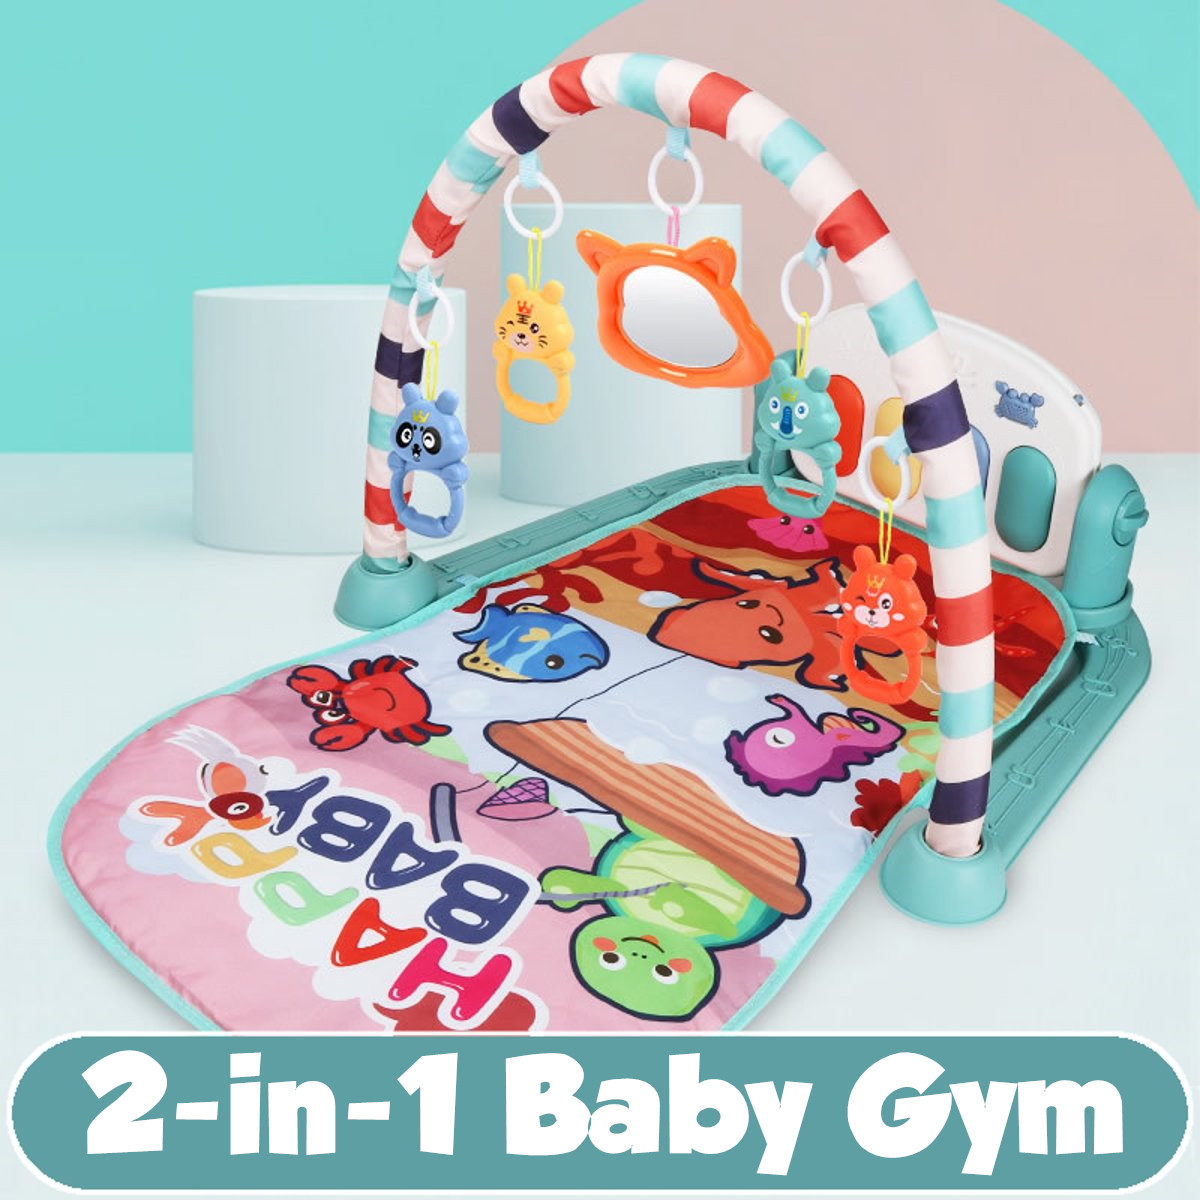 765643CM-2-IN-1-Multi-functional-Baby-Gym-with-Play-Mat-Keyboard-Soft-Light-Rattle-Toys-for-Baby-Gif-1709556-3